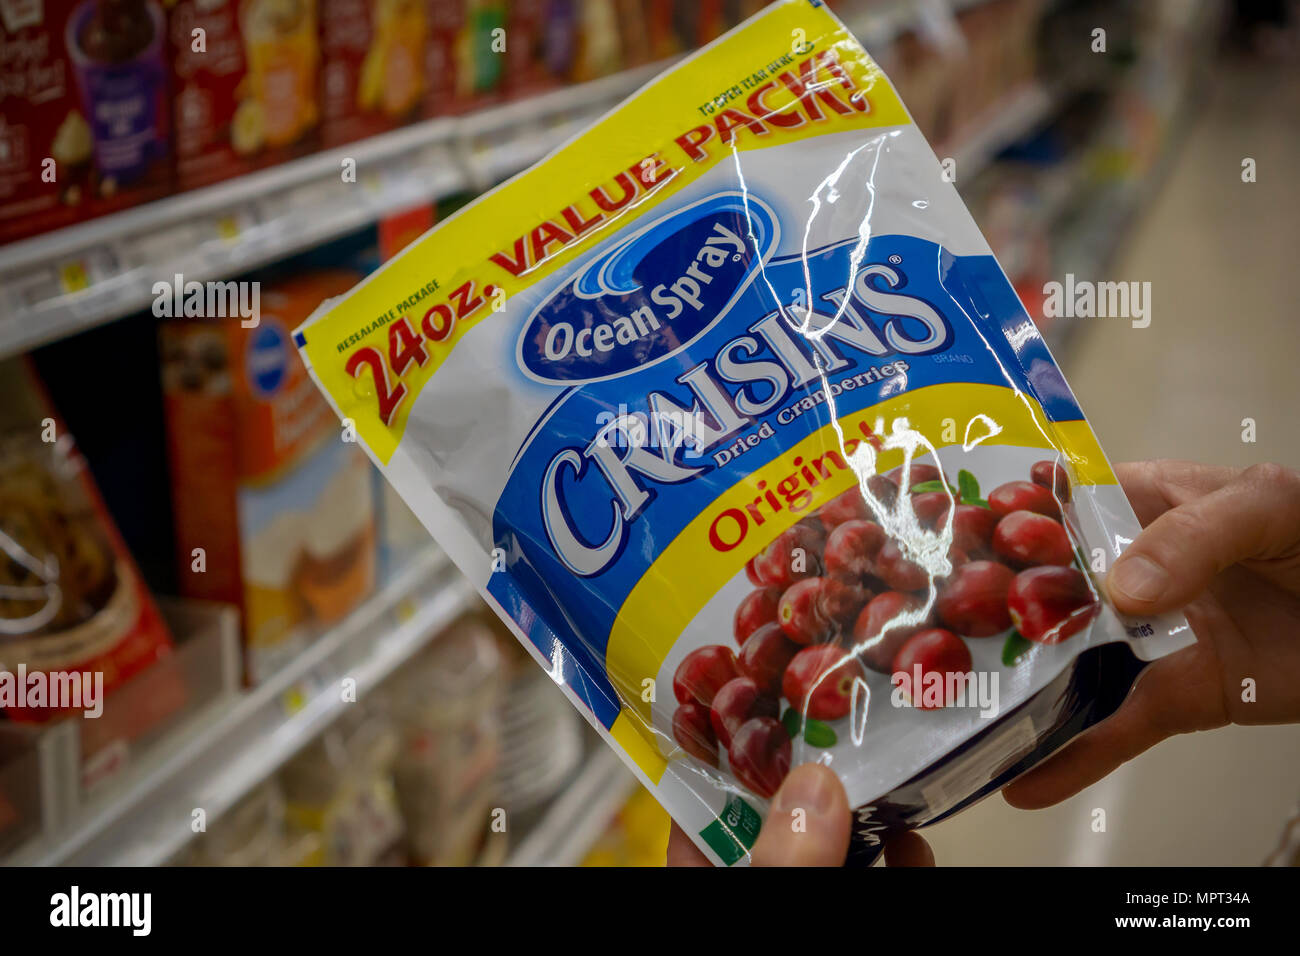 Ocean Spray cooperative dried cranberries branded as Craisins is seen in a supermarket in New York on Monday, May 21, 2018. The U.S. Dept. of Agriculture is proposing a regulation on the volume of cranberries produced by farmers for 2018-19 crops. The seasonal volume regulation would cut the glut of cranberries on the market. (© Richard B. Levine) Stock Photo